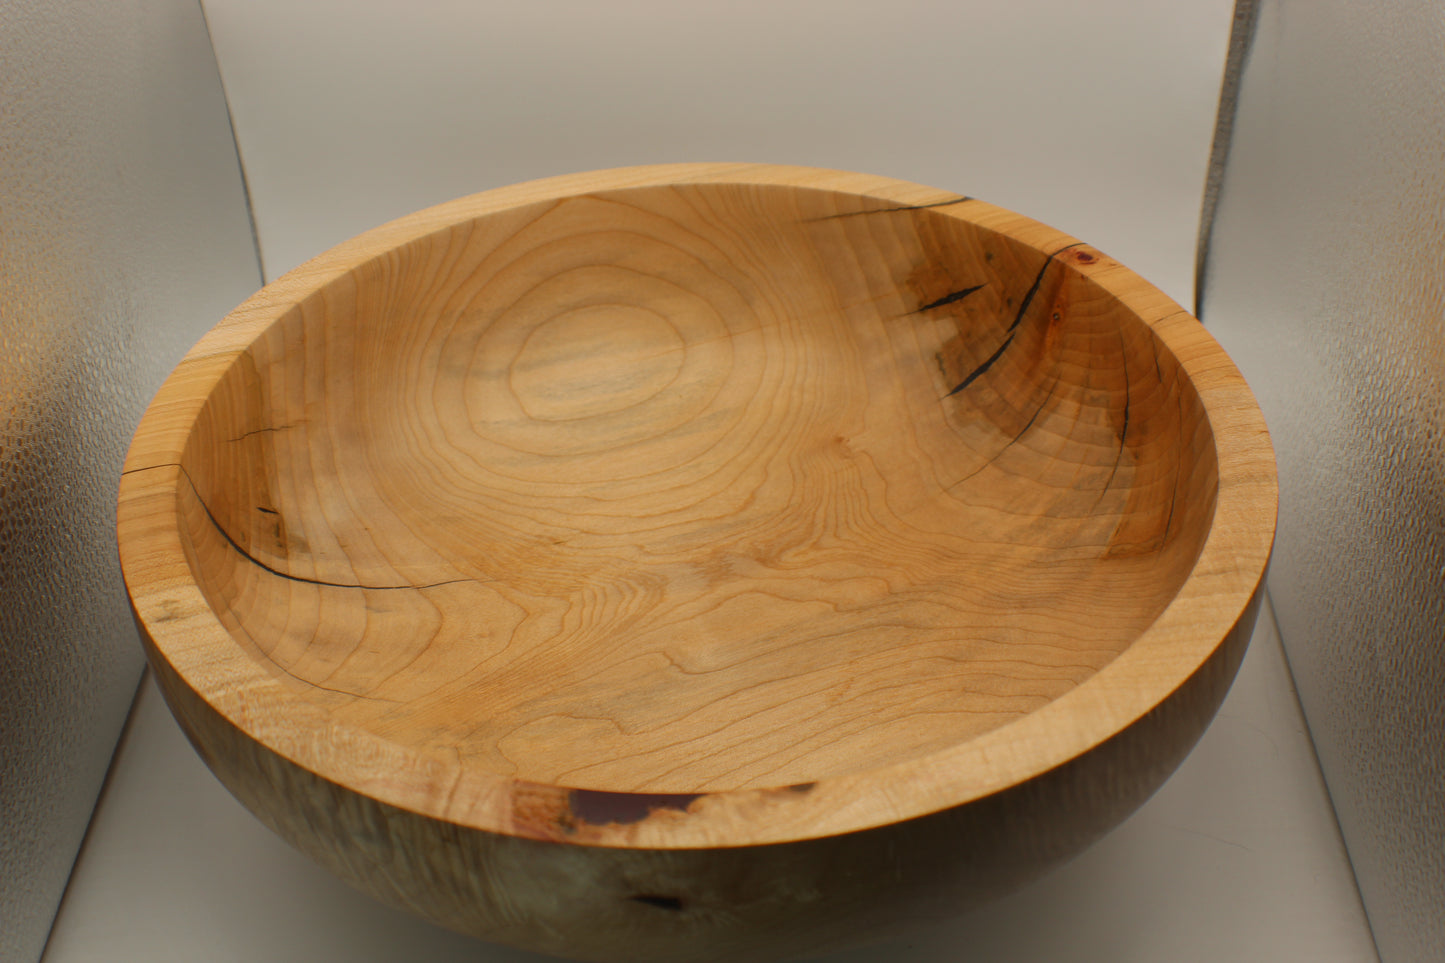 Spalted Maple Fruit Bowl